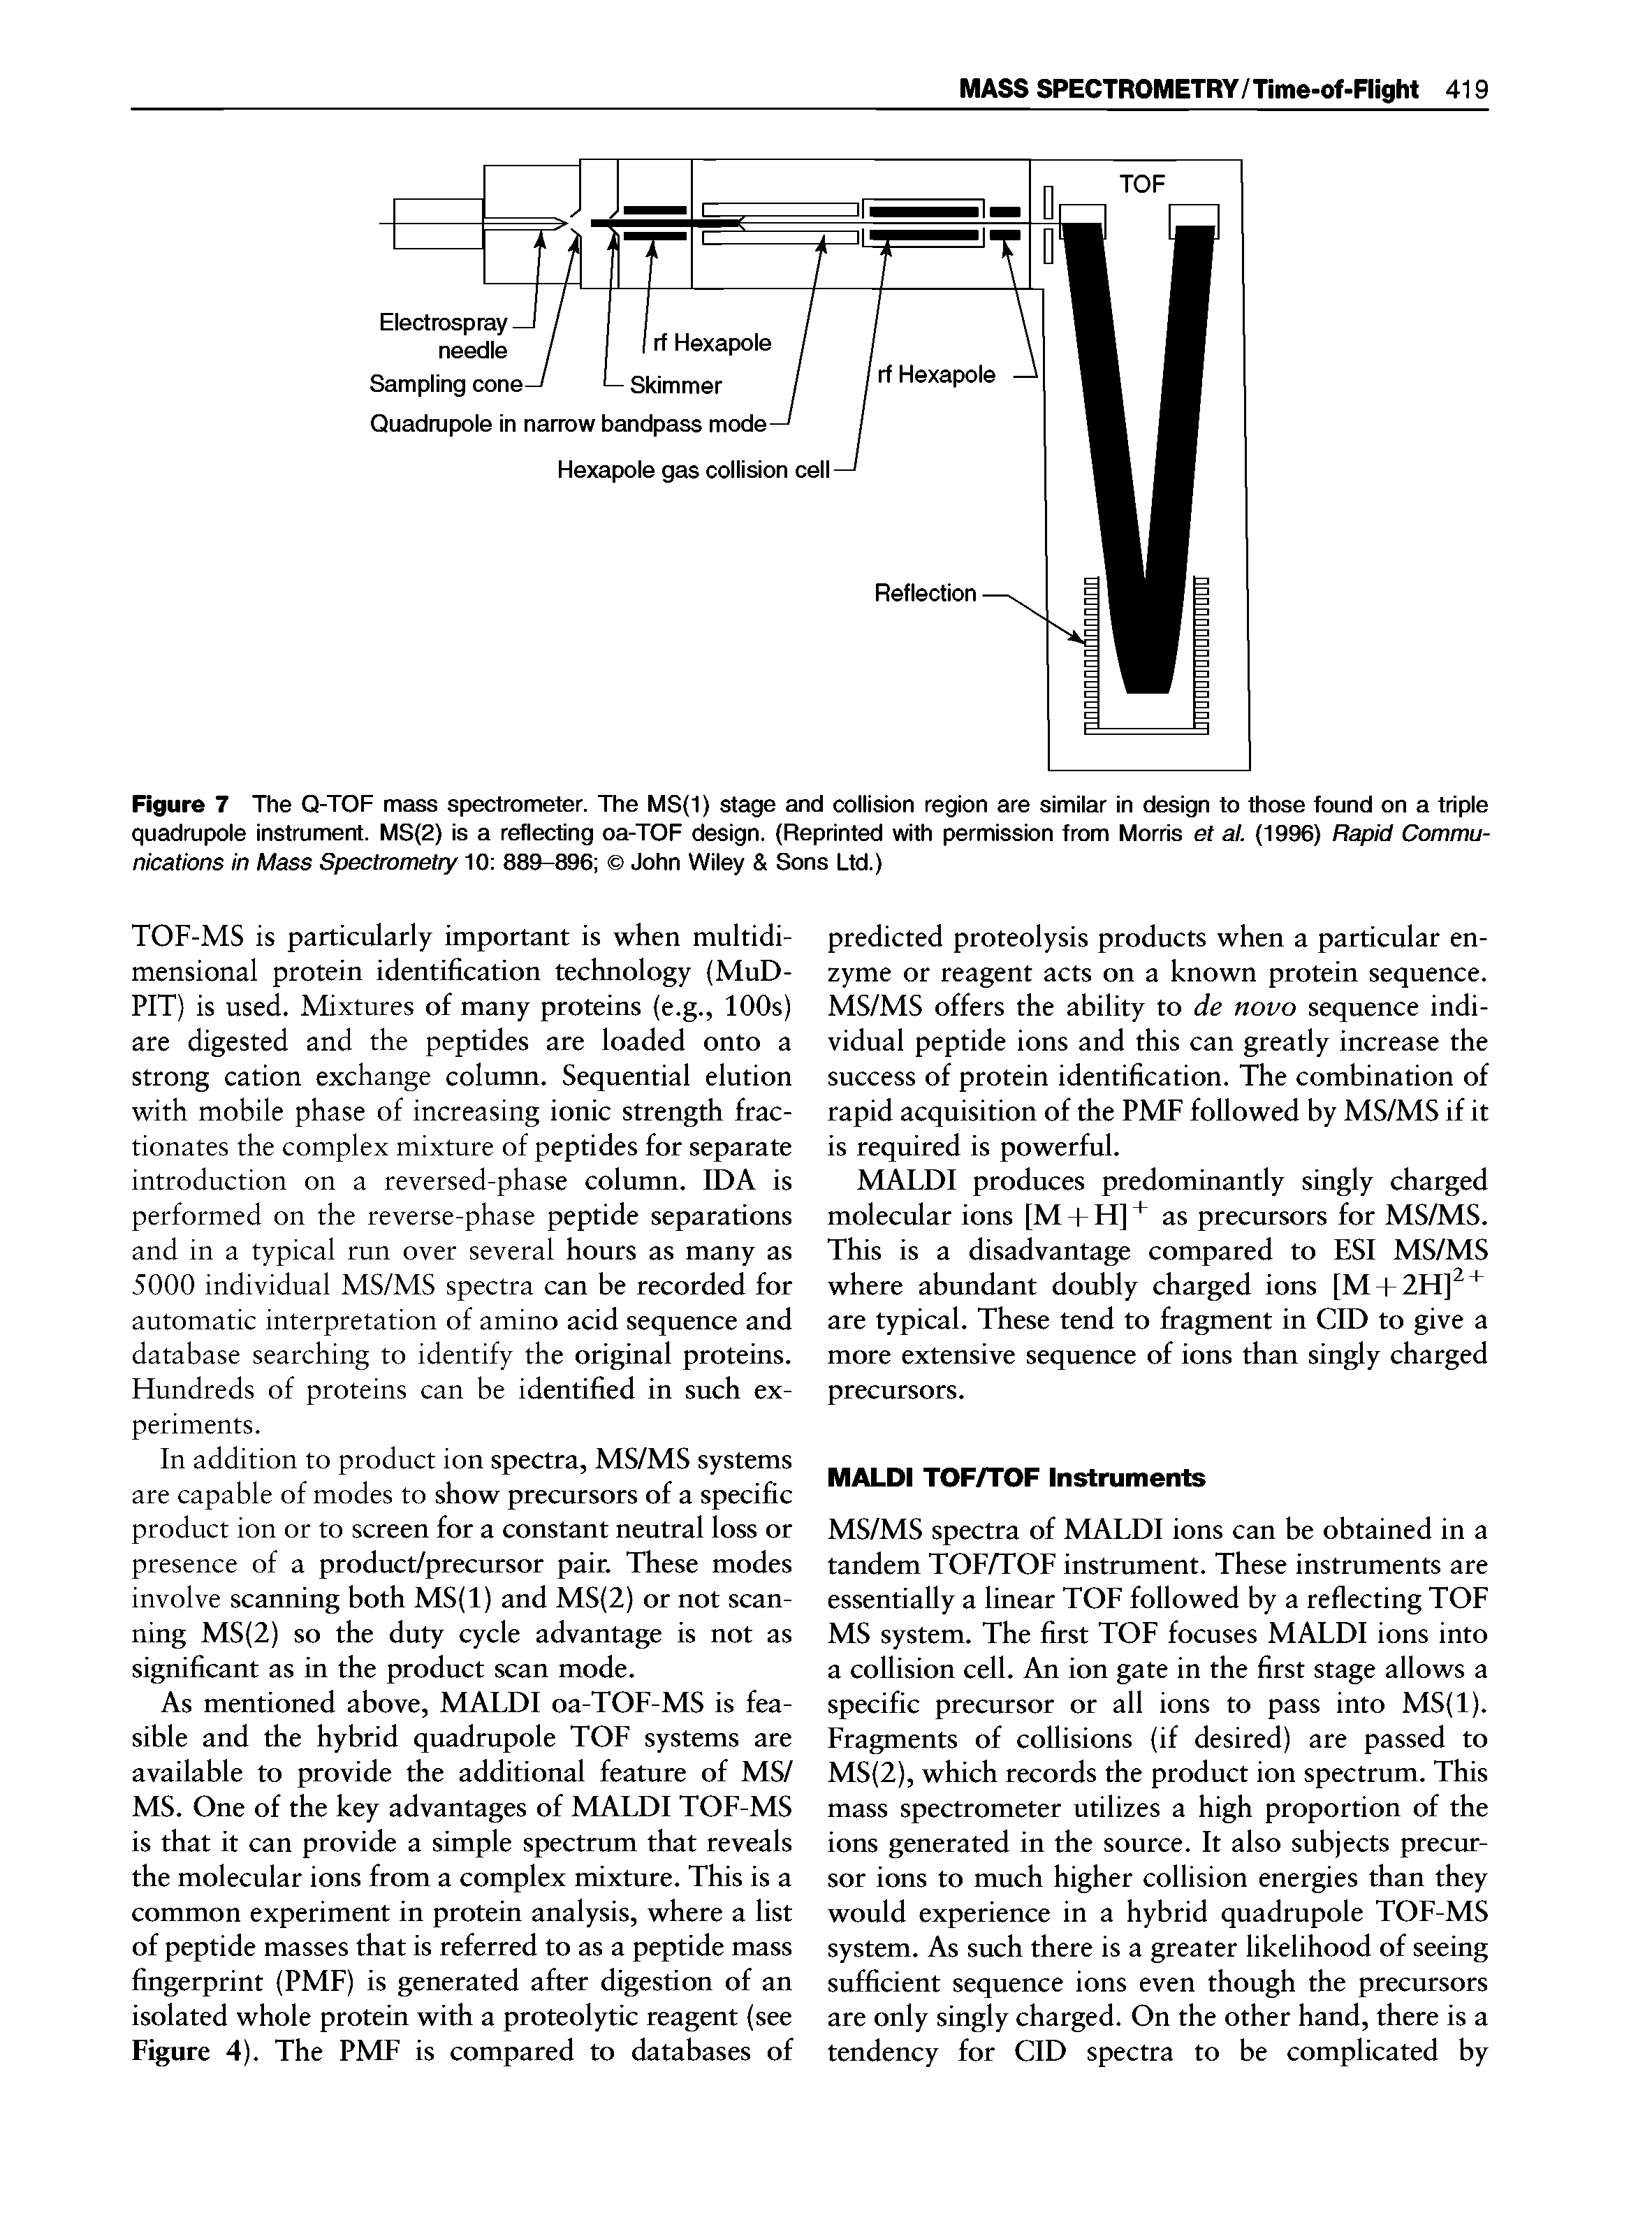 Figure 7 The Q-TOF mass spectrometer. The MS(1) stage and collision region are similar in design to those found on a triple quadrupole Instrument. MS 2) is a reflecting oa-TOF design. (Reprinted with permission from Morris et al. (1996) Rapid Communications in Mass Spectrometry 10 889-896 John Wiley Sons Ltd.)...